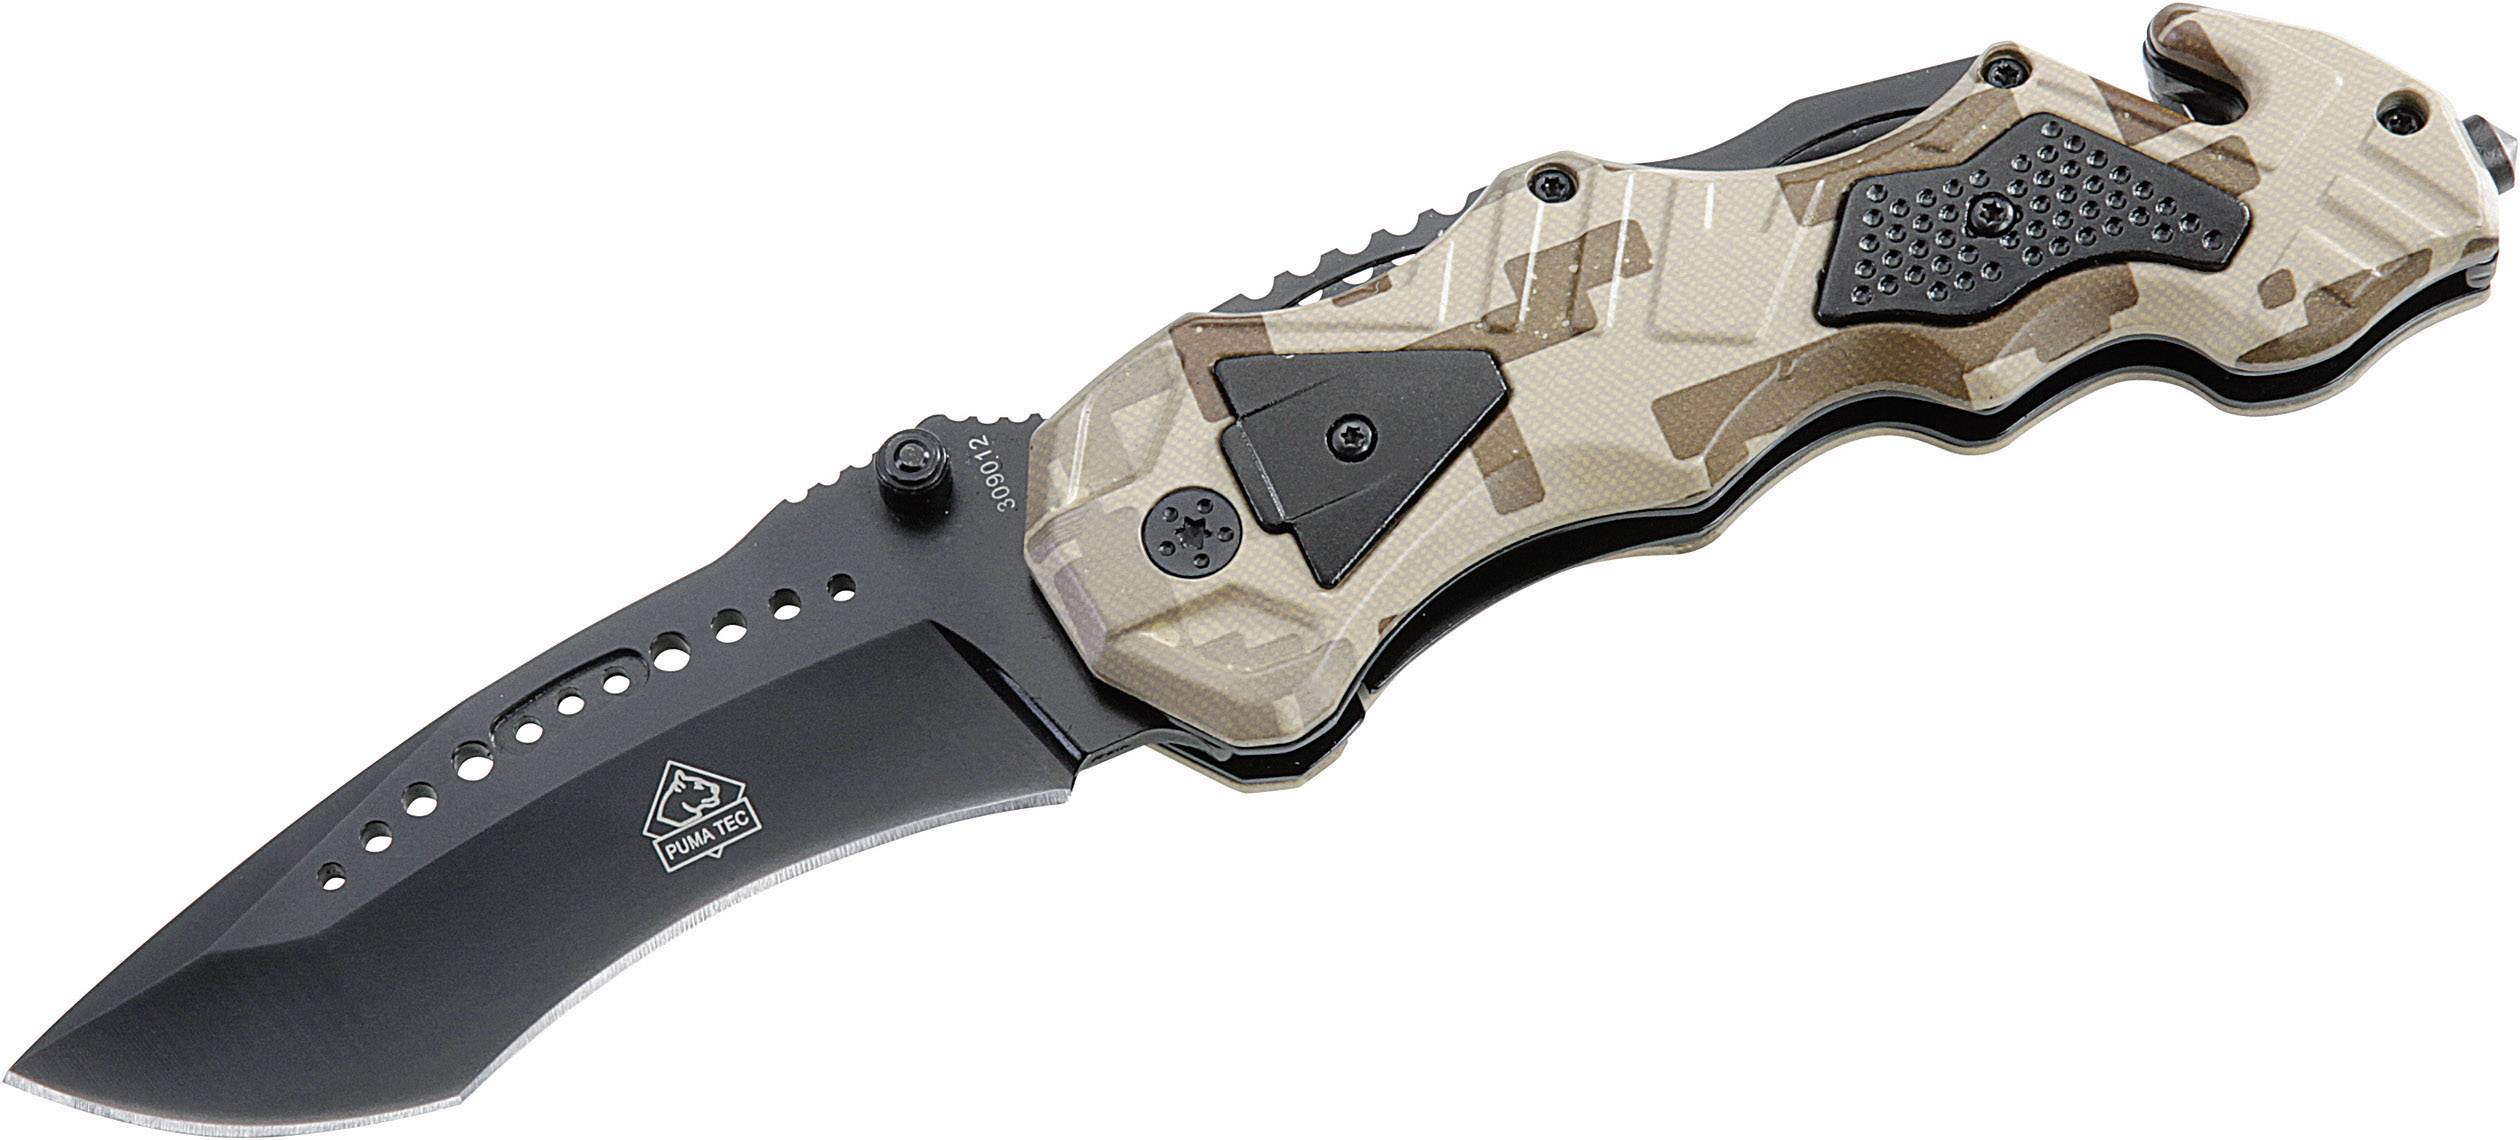 Puma Tec One-Hand Rescue Knife Camouflage Optics 7309012 - Blades and  Triggers